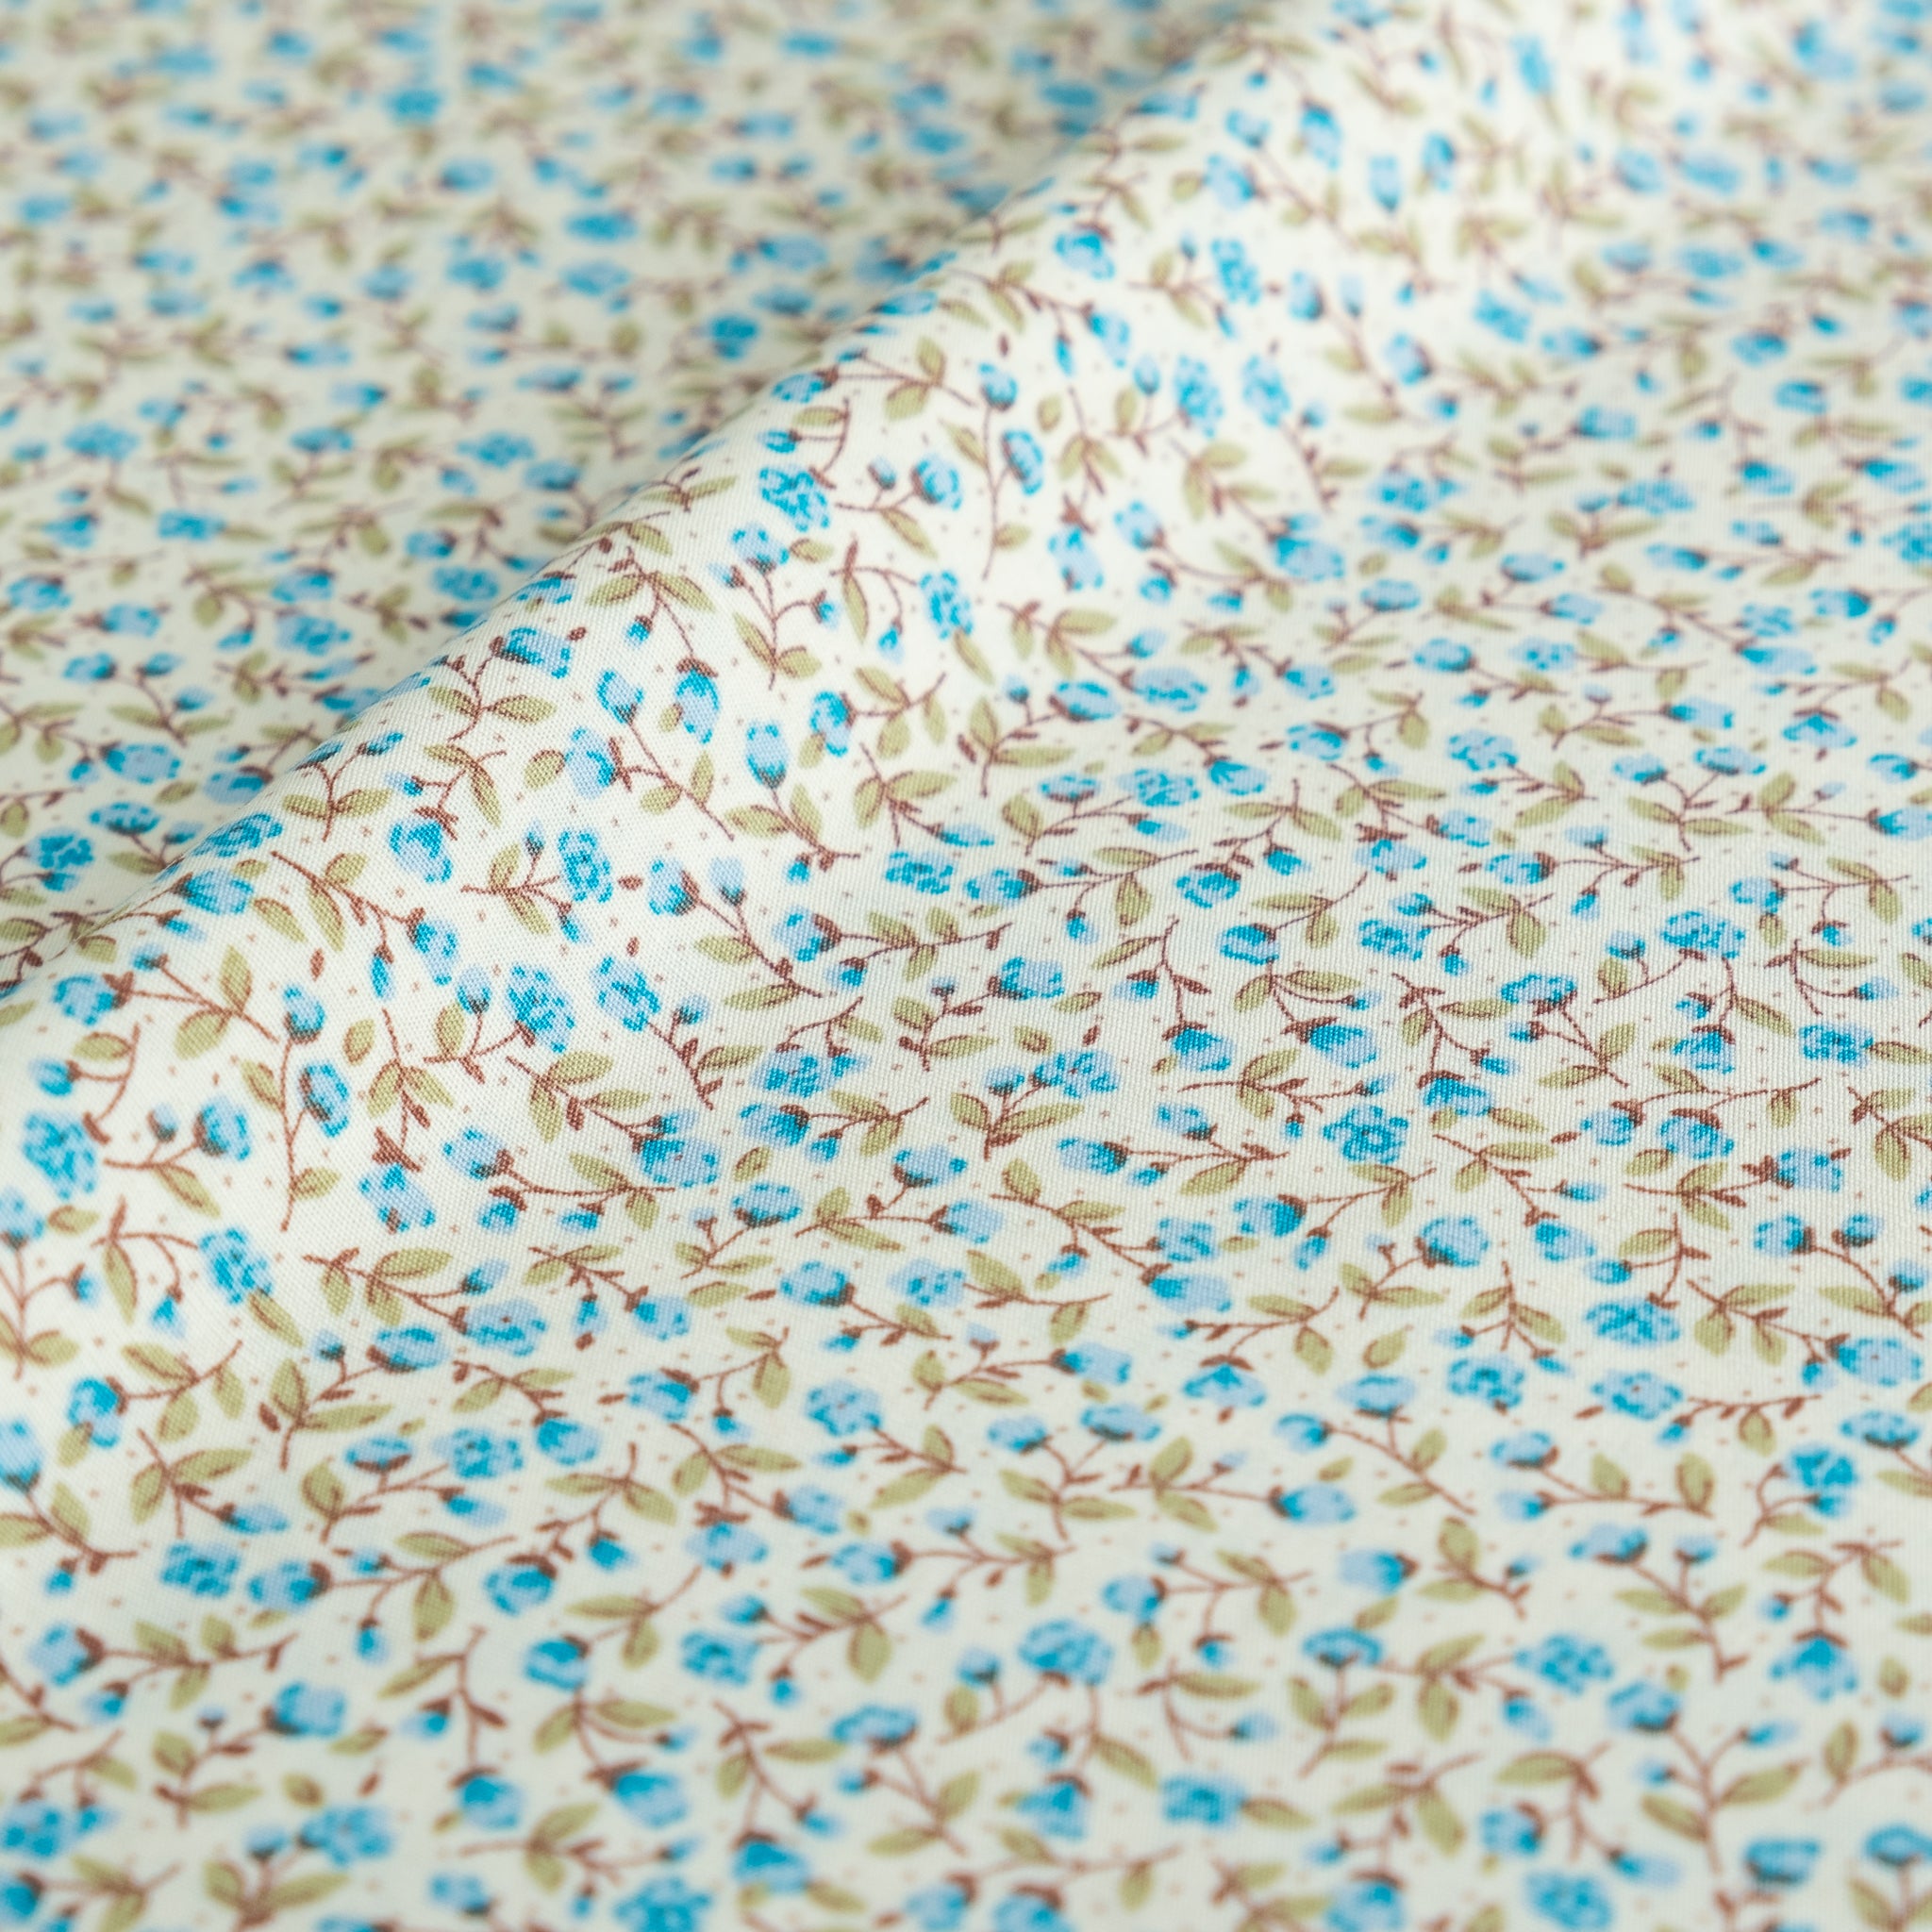 Floral Fabric - White Daisy Ditsy Flower on Teal Blue - 100% Cotton Po –  House of Haberdashery